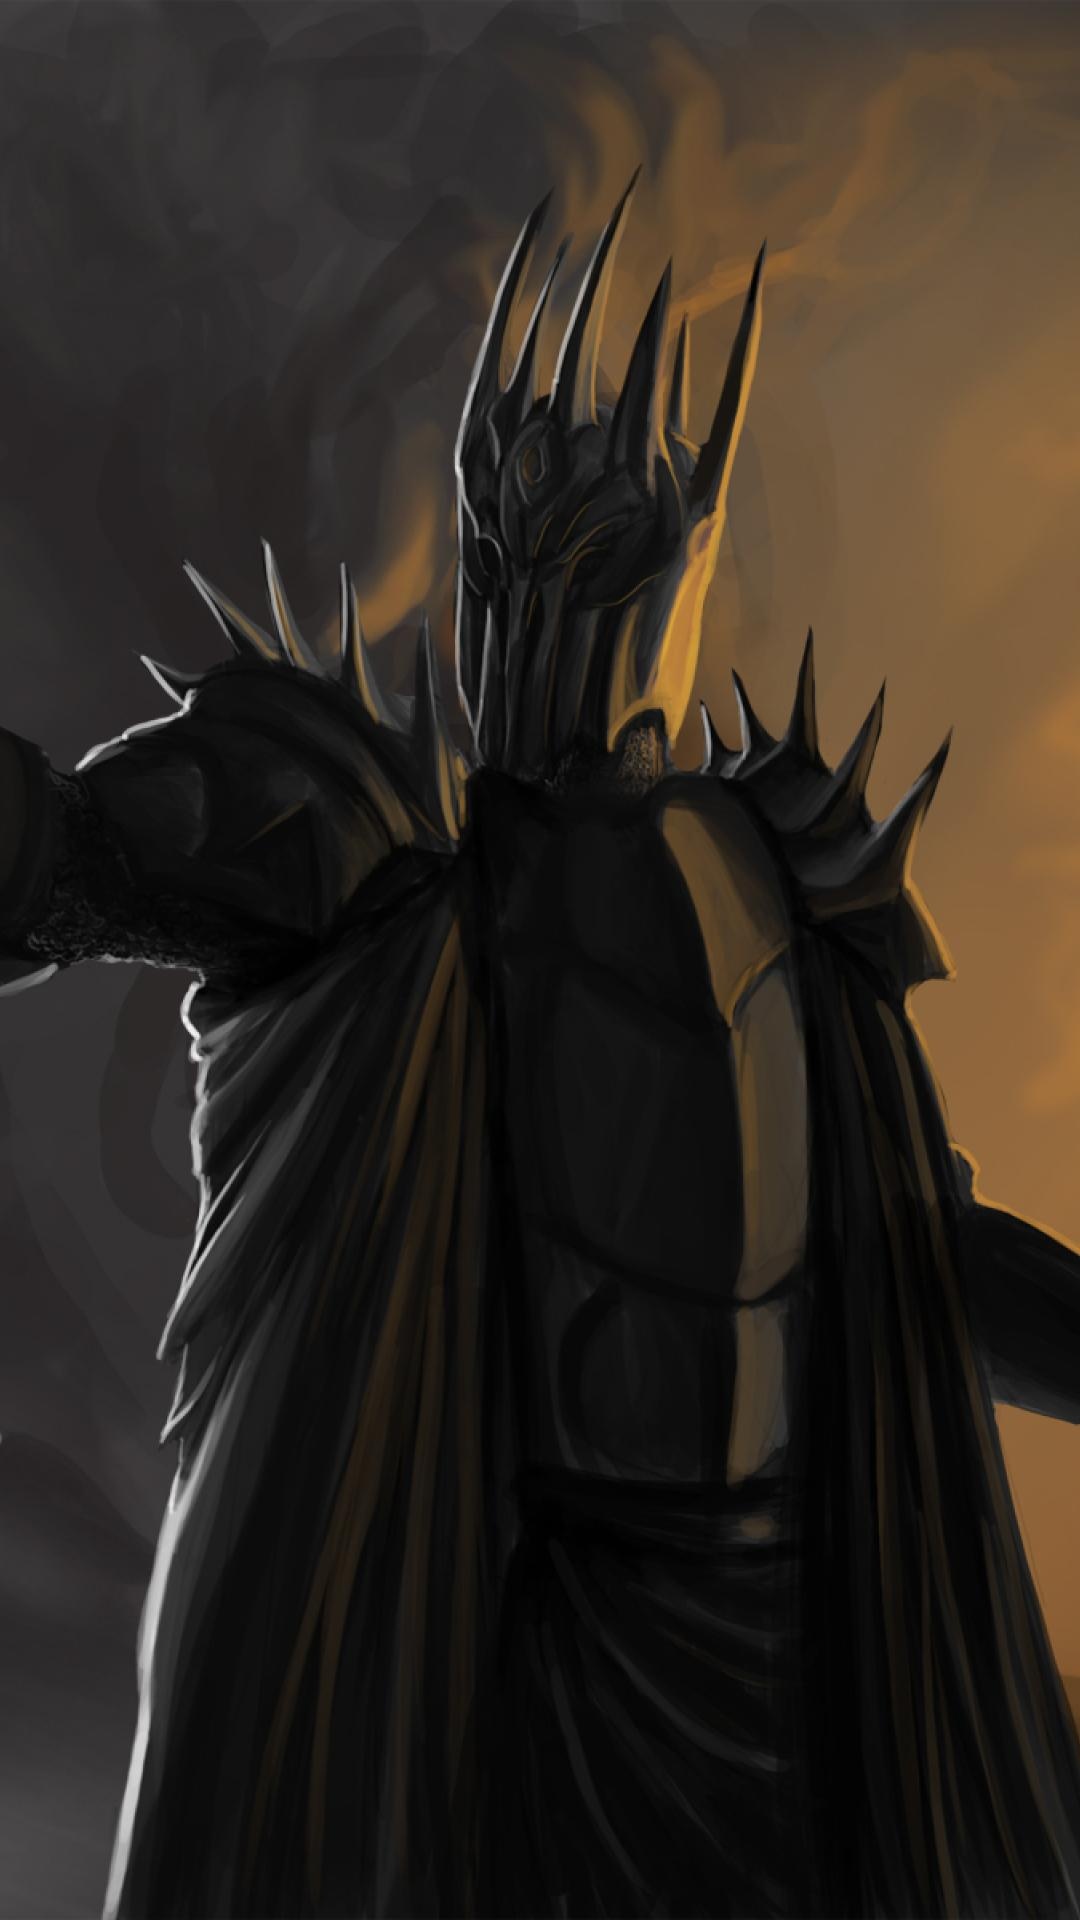 Sauron, Phone wallpapers, Phone backgrounds, 1080x1920 Full HD Phone